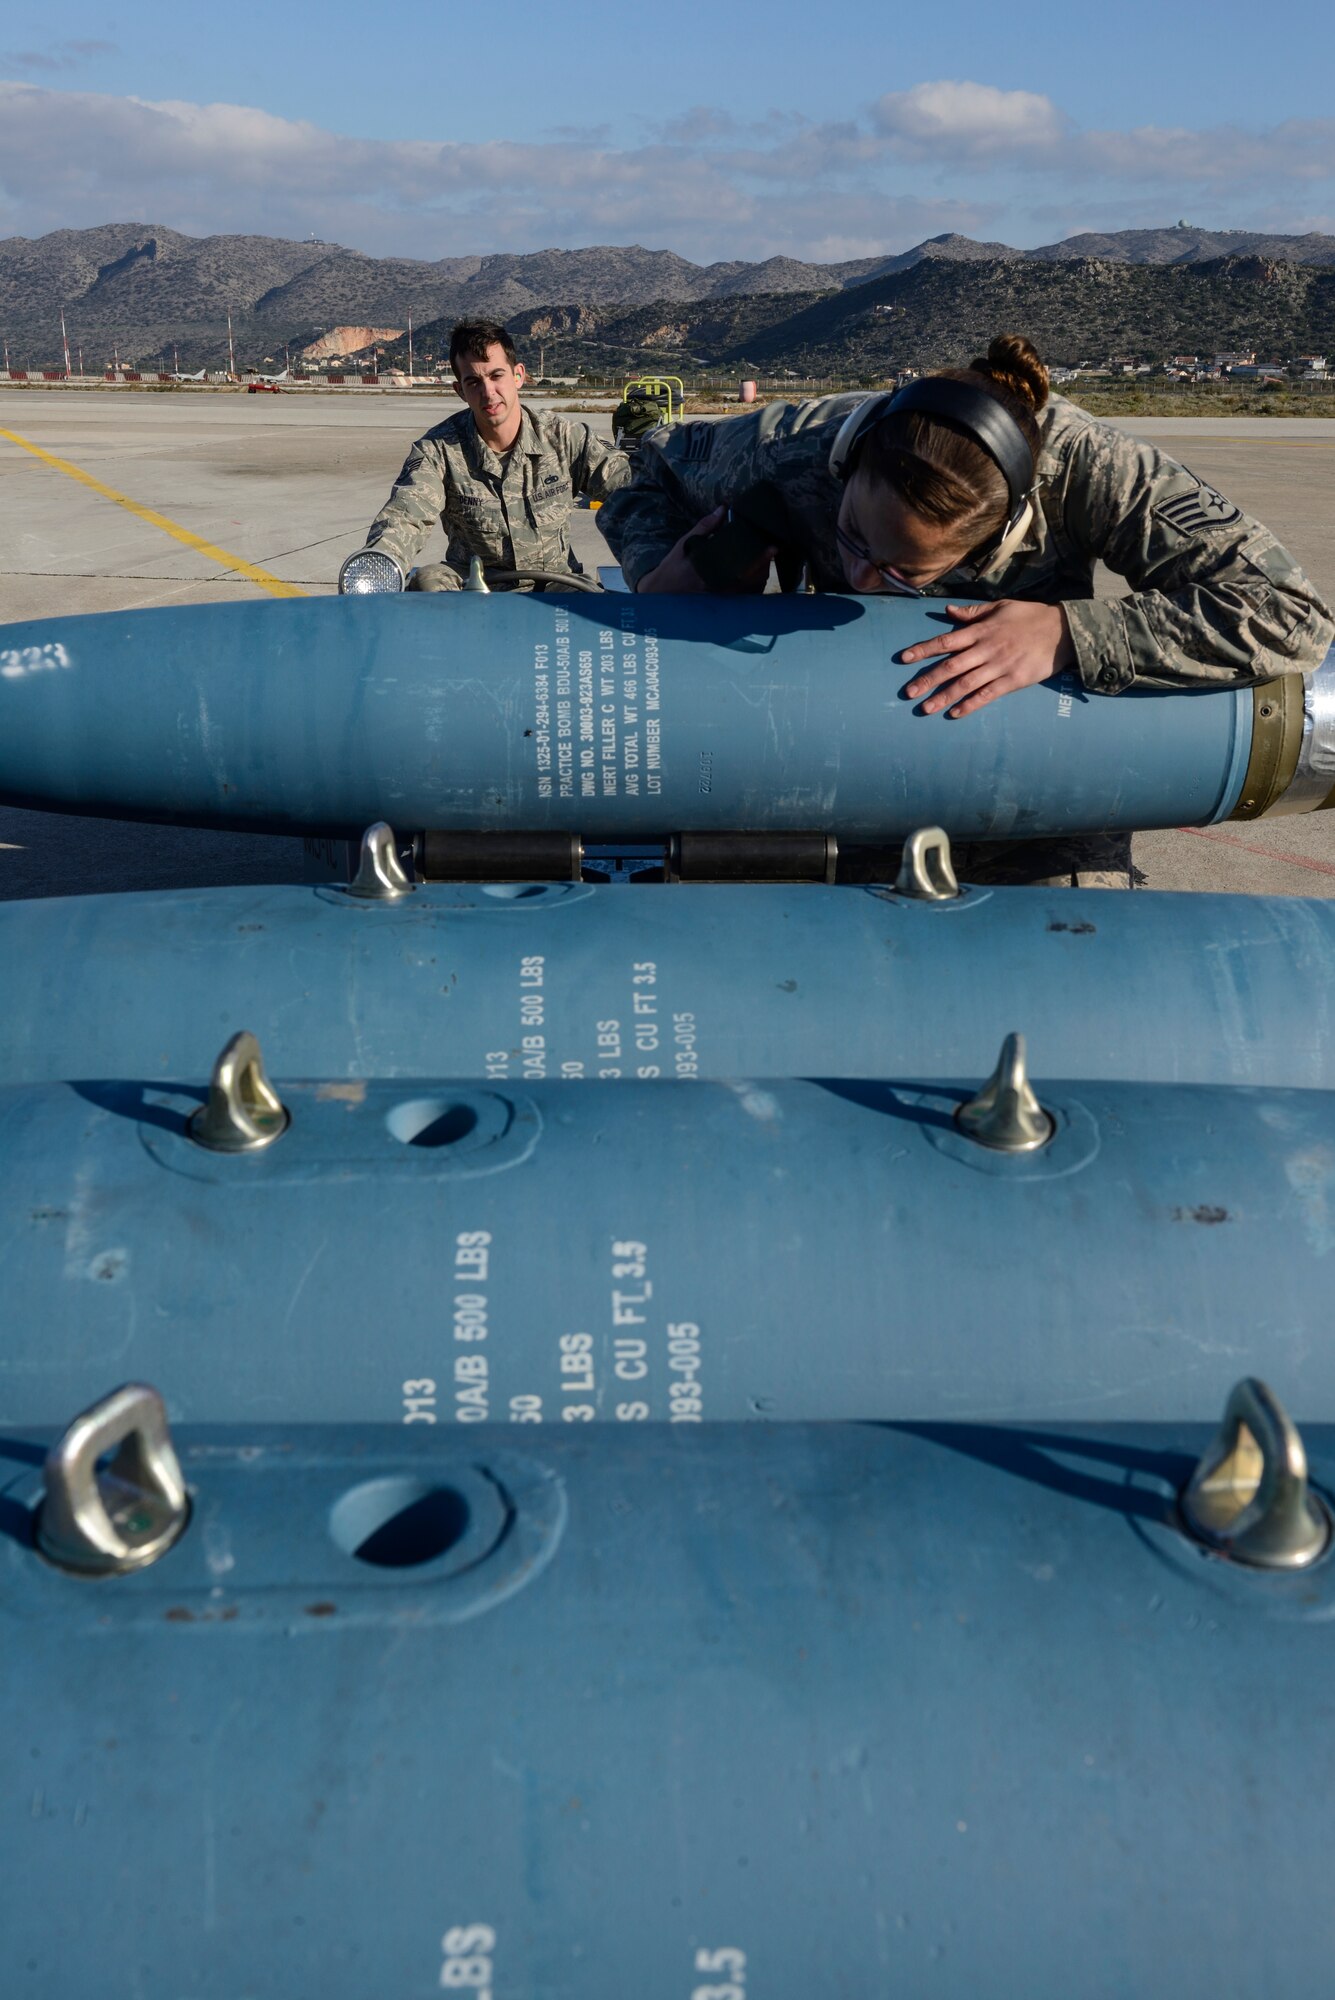 U.S. Air Force Staff Sgt. Faith Olson and Staff Sgt. John Denny, weapons load crew chiefs assigned to the 480th Expeditionary Fighter Squadron, Spangdahlem Air Base, Germany, prep a Bomb Drop Unit-50 for transport during a flying training deployment at Souda Bay, Greece, Jan. 29, 2016. Approximately 300 personnel and 18 F-16s from the 52nd Fighter Wing are supporting the FTD as part of U.S. Air Forces in Europe-Air Forces Africa's ‘Forward Ready Now’ stance. (U.S. Air Force photo by Staff Sgt. Christopher Ruano/Released)